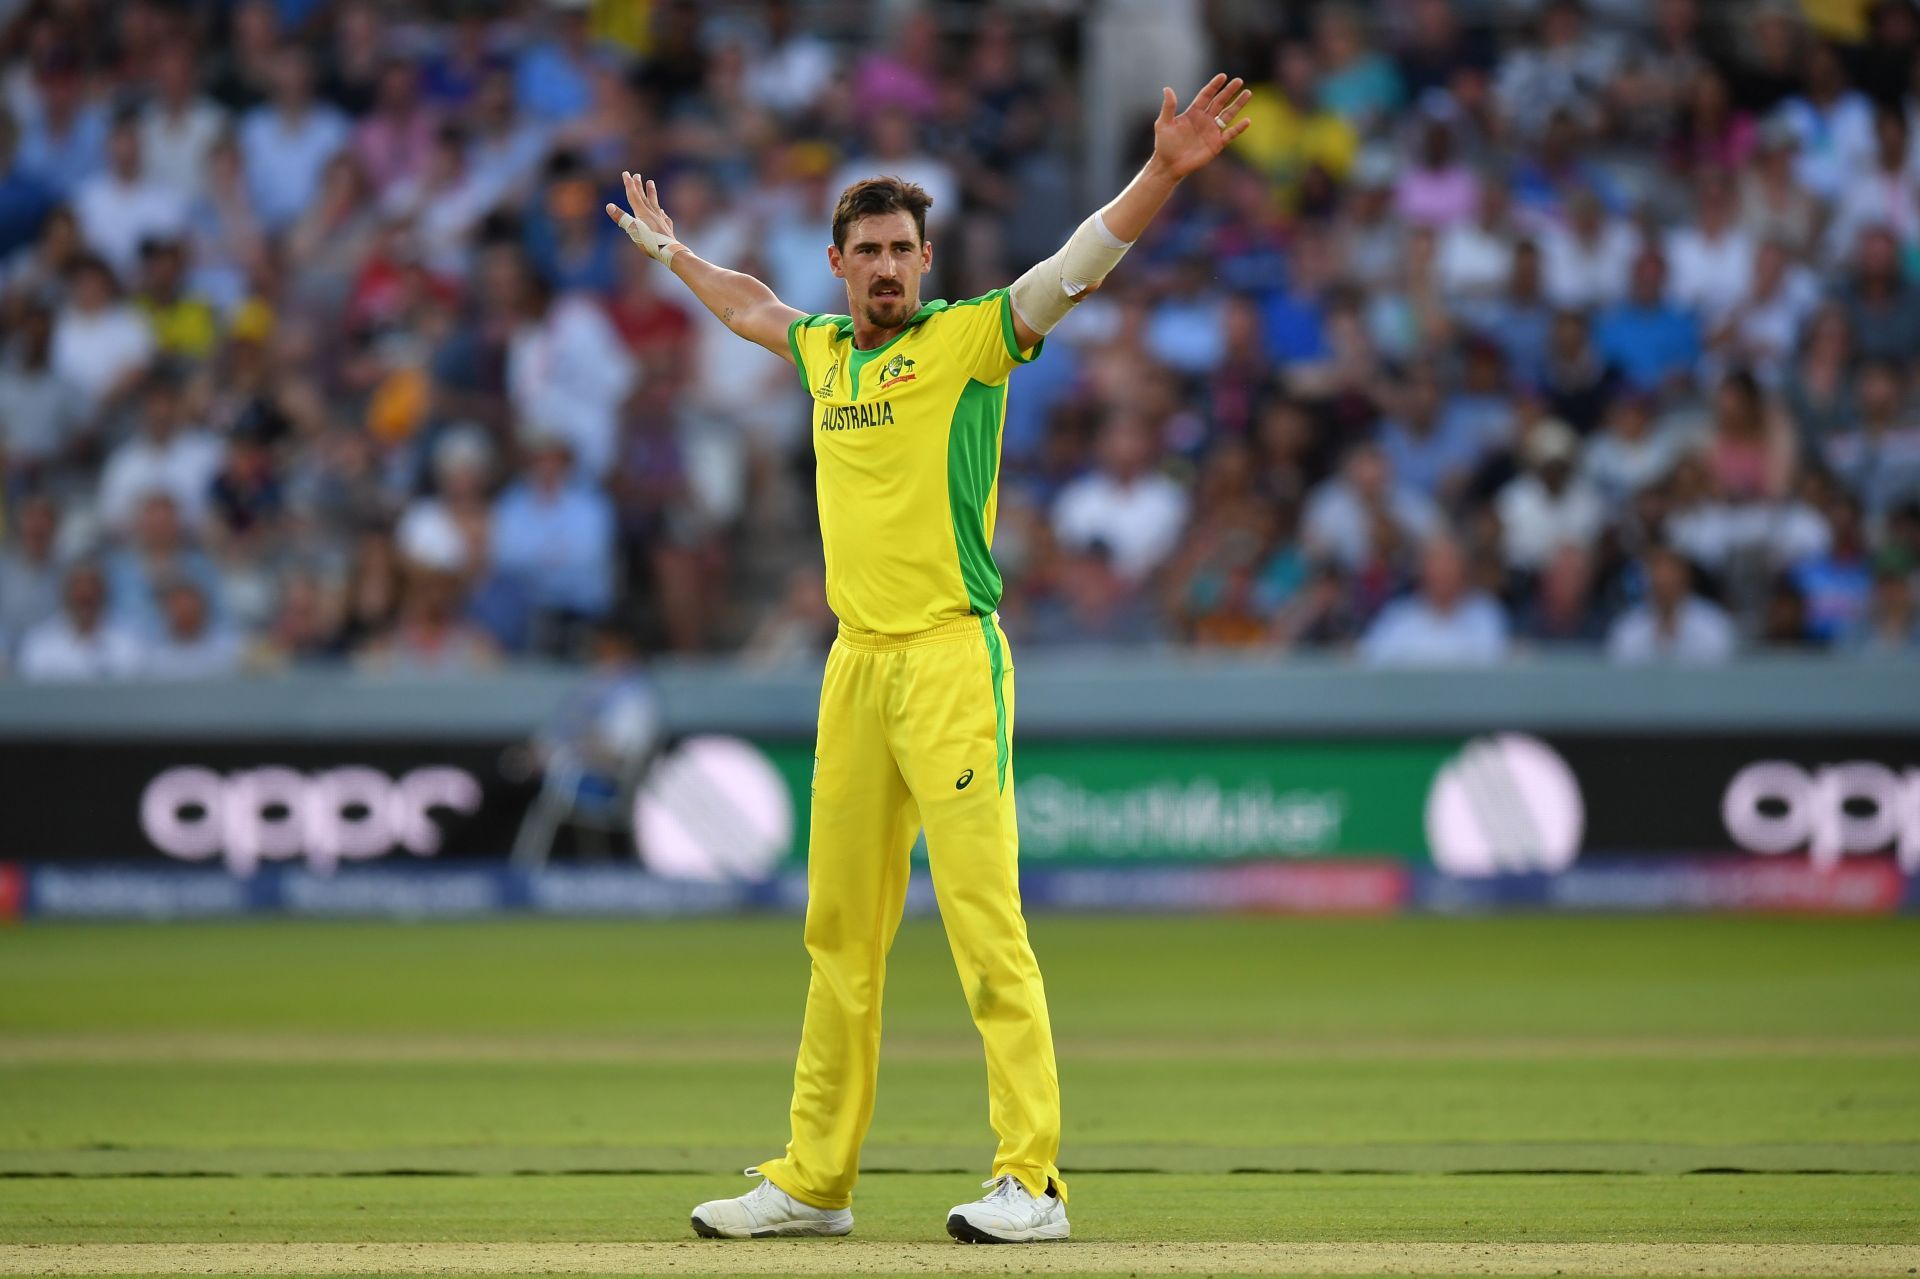 Australia will be hoping for some match-winning efforts from Mitchell Starc. Pic: Getty Images